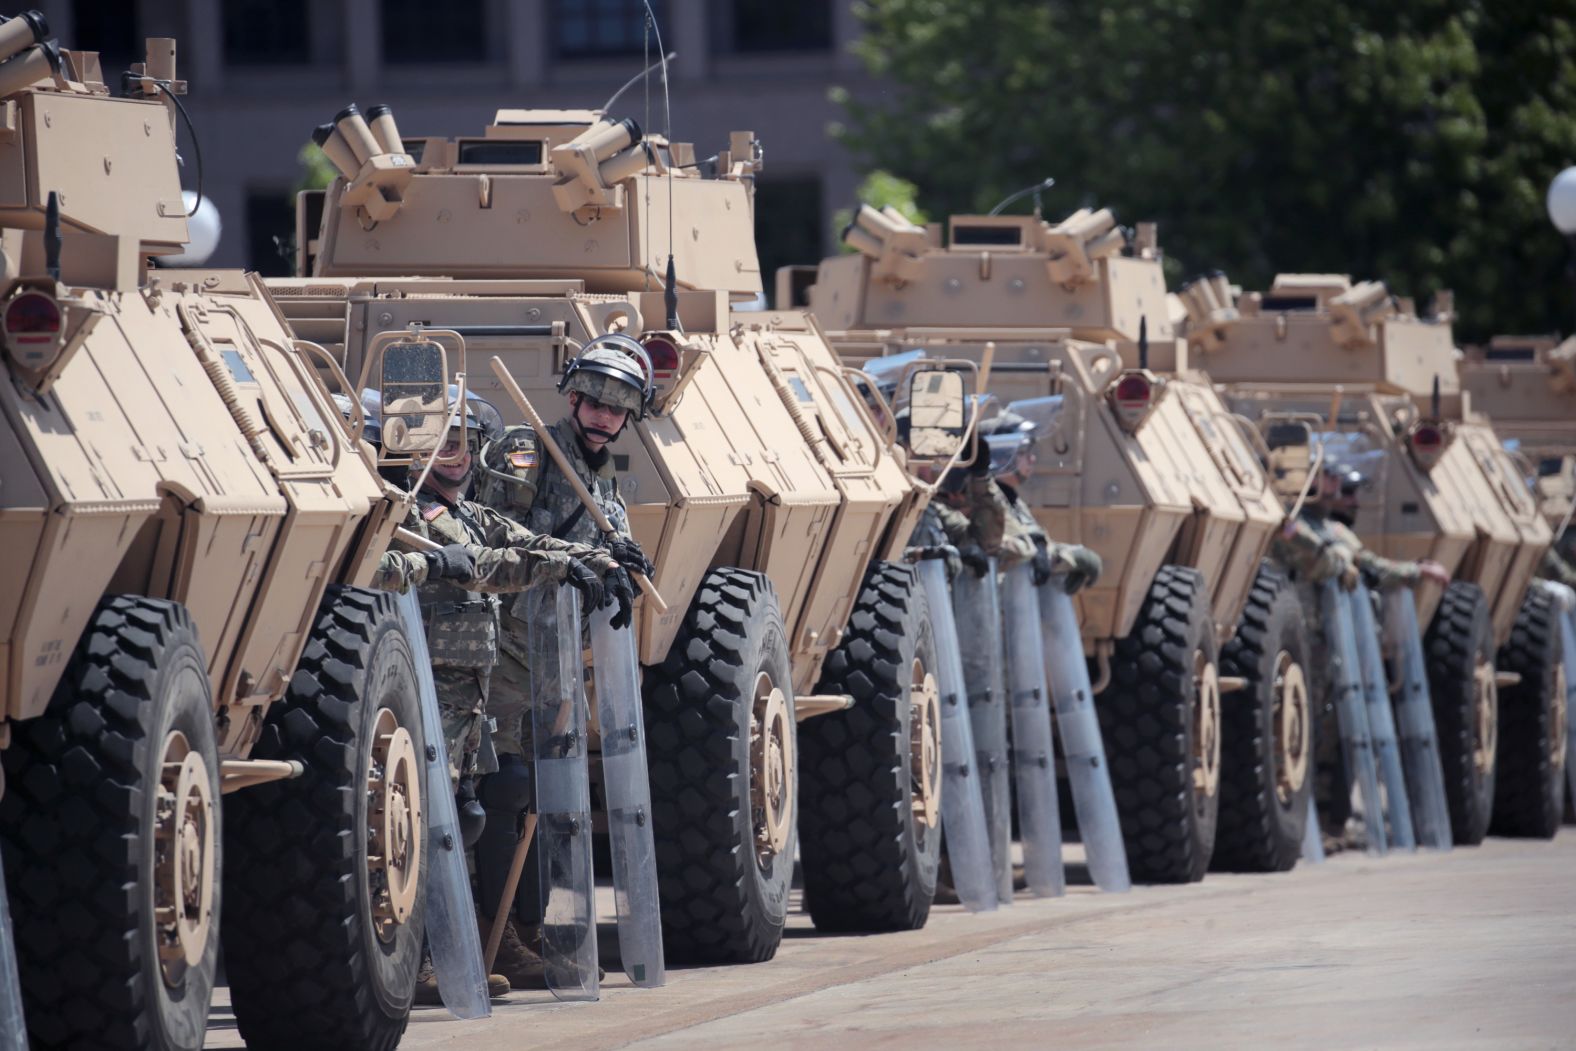 Armored vehicles from the Minnesota Army National Guard surround the Capitol in St. Paul on May 31.